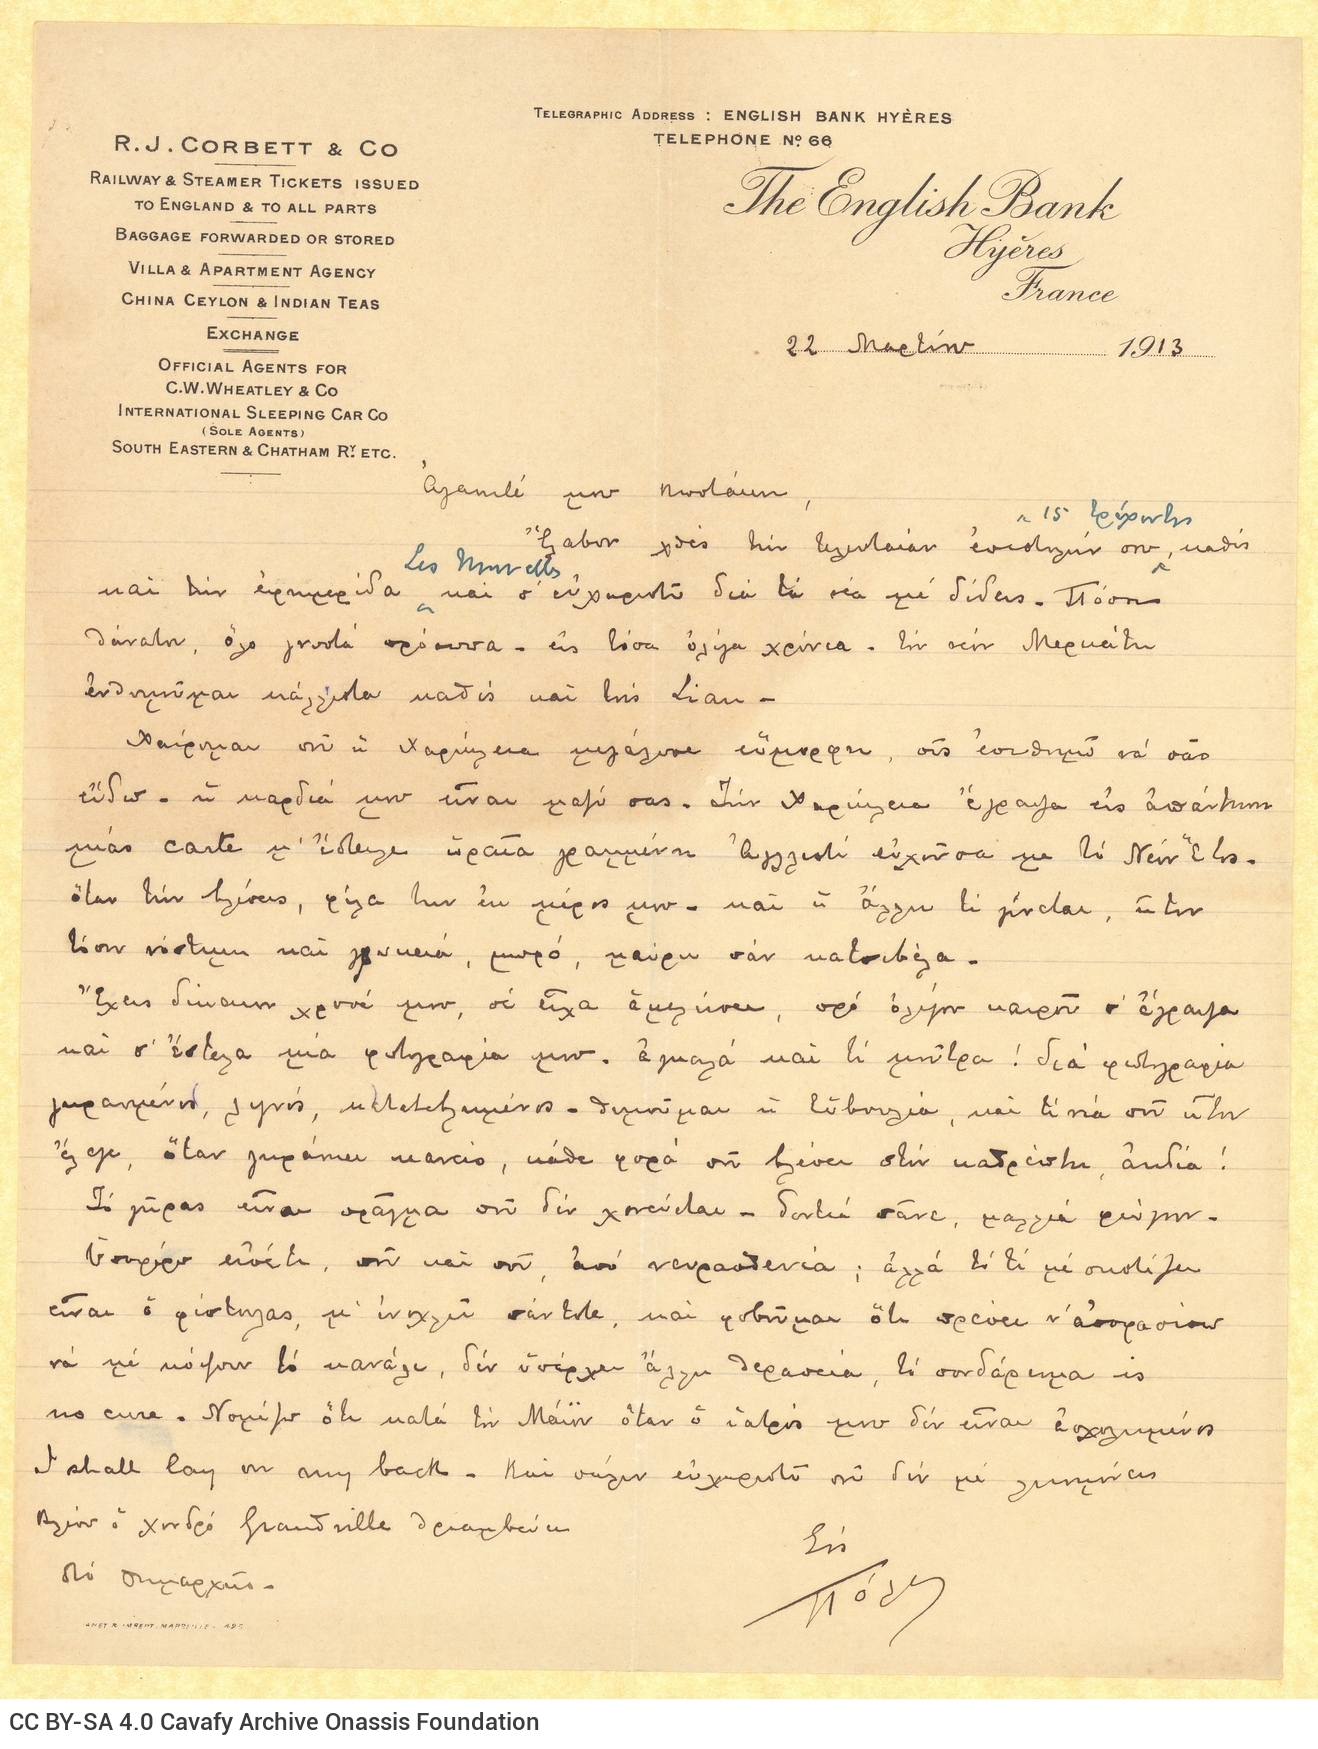 Handwritten letter by Paul Cavafy to C. P. Cavafy from Hyères, France, according to the letterhead. Paul comments on his hea